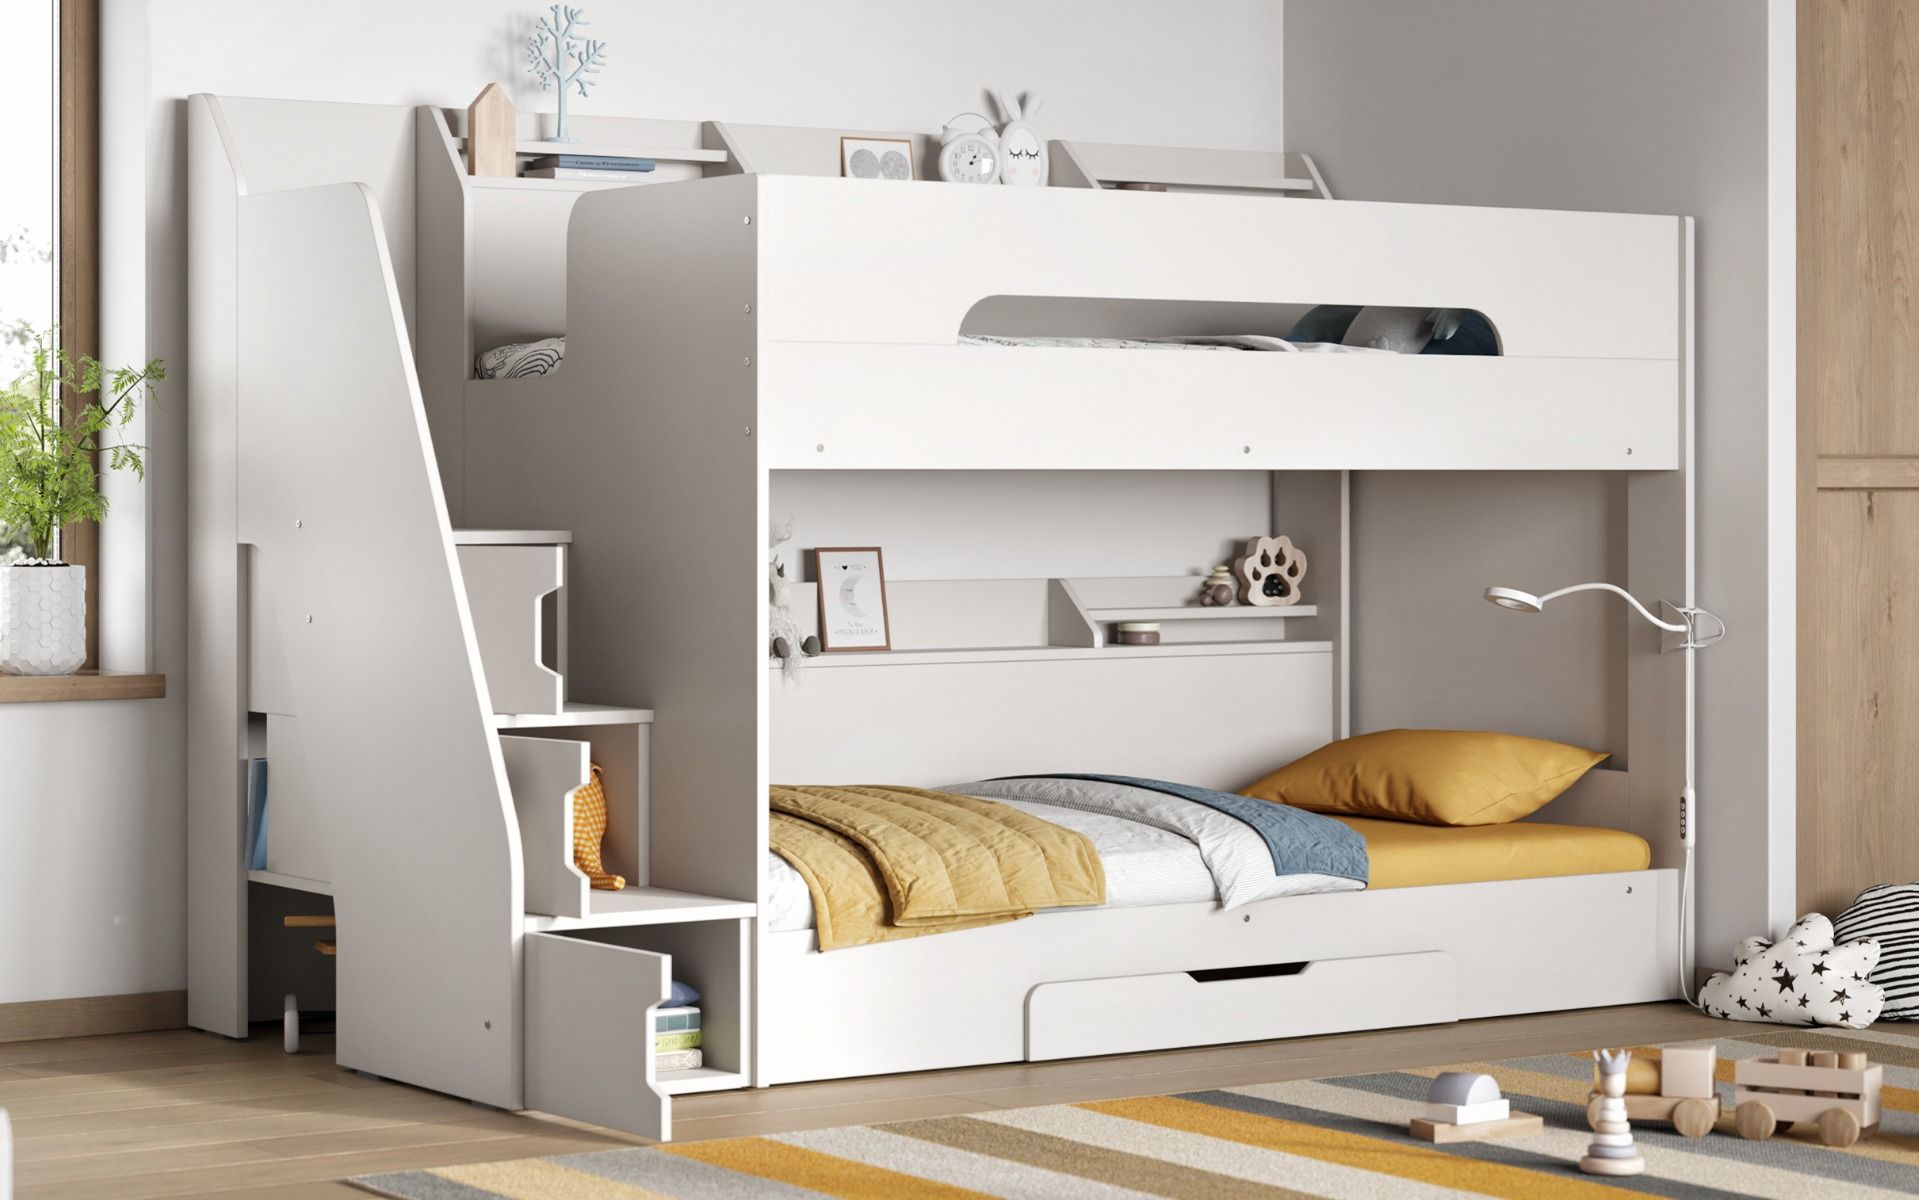 Flair Slick Staircase Bunk Bed with Storage - White